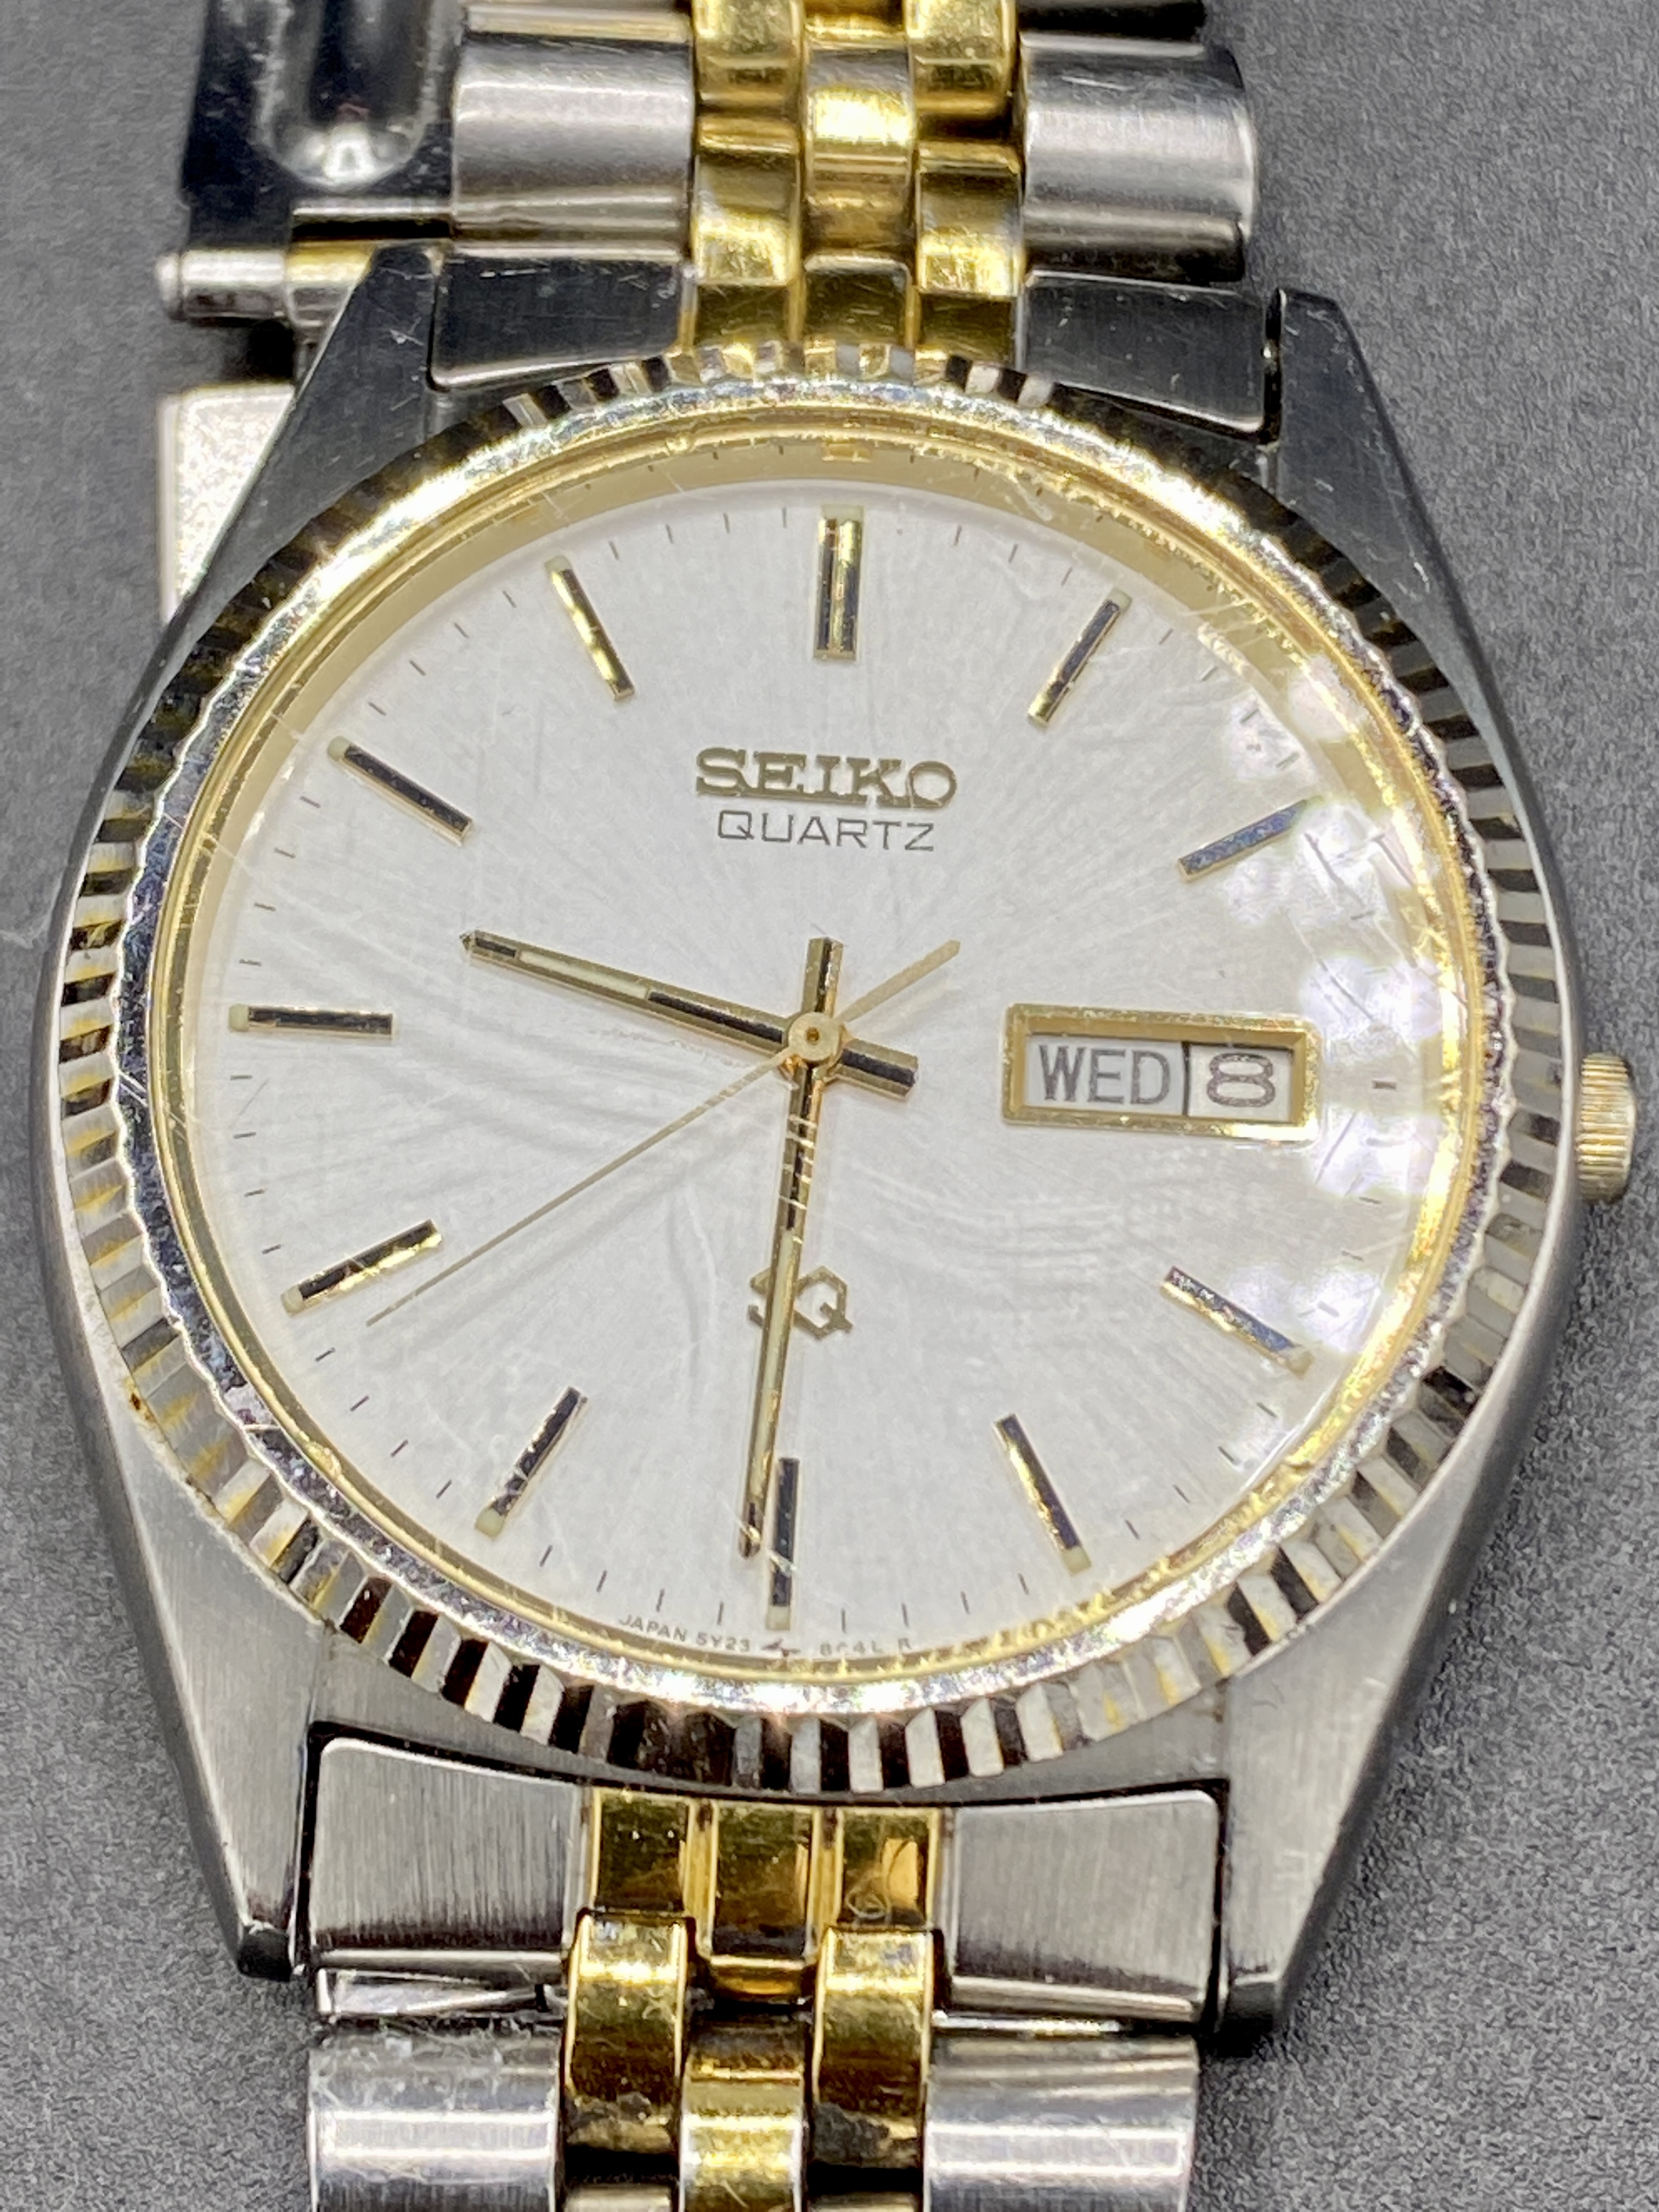 Seiko automatic gent's wrist watch with day and date aperture, with 5 other wrist watches - Image 7 of 7